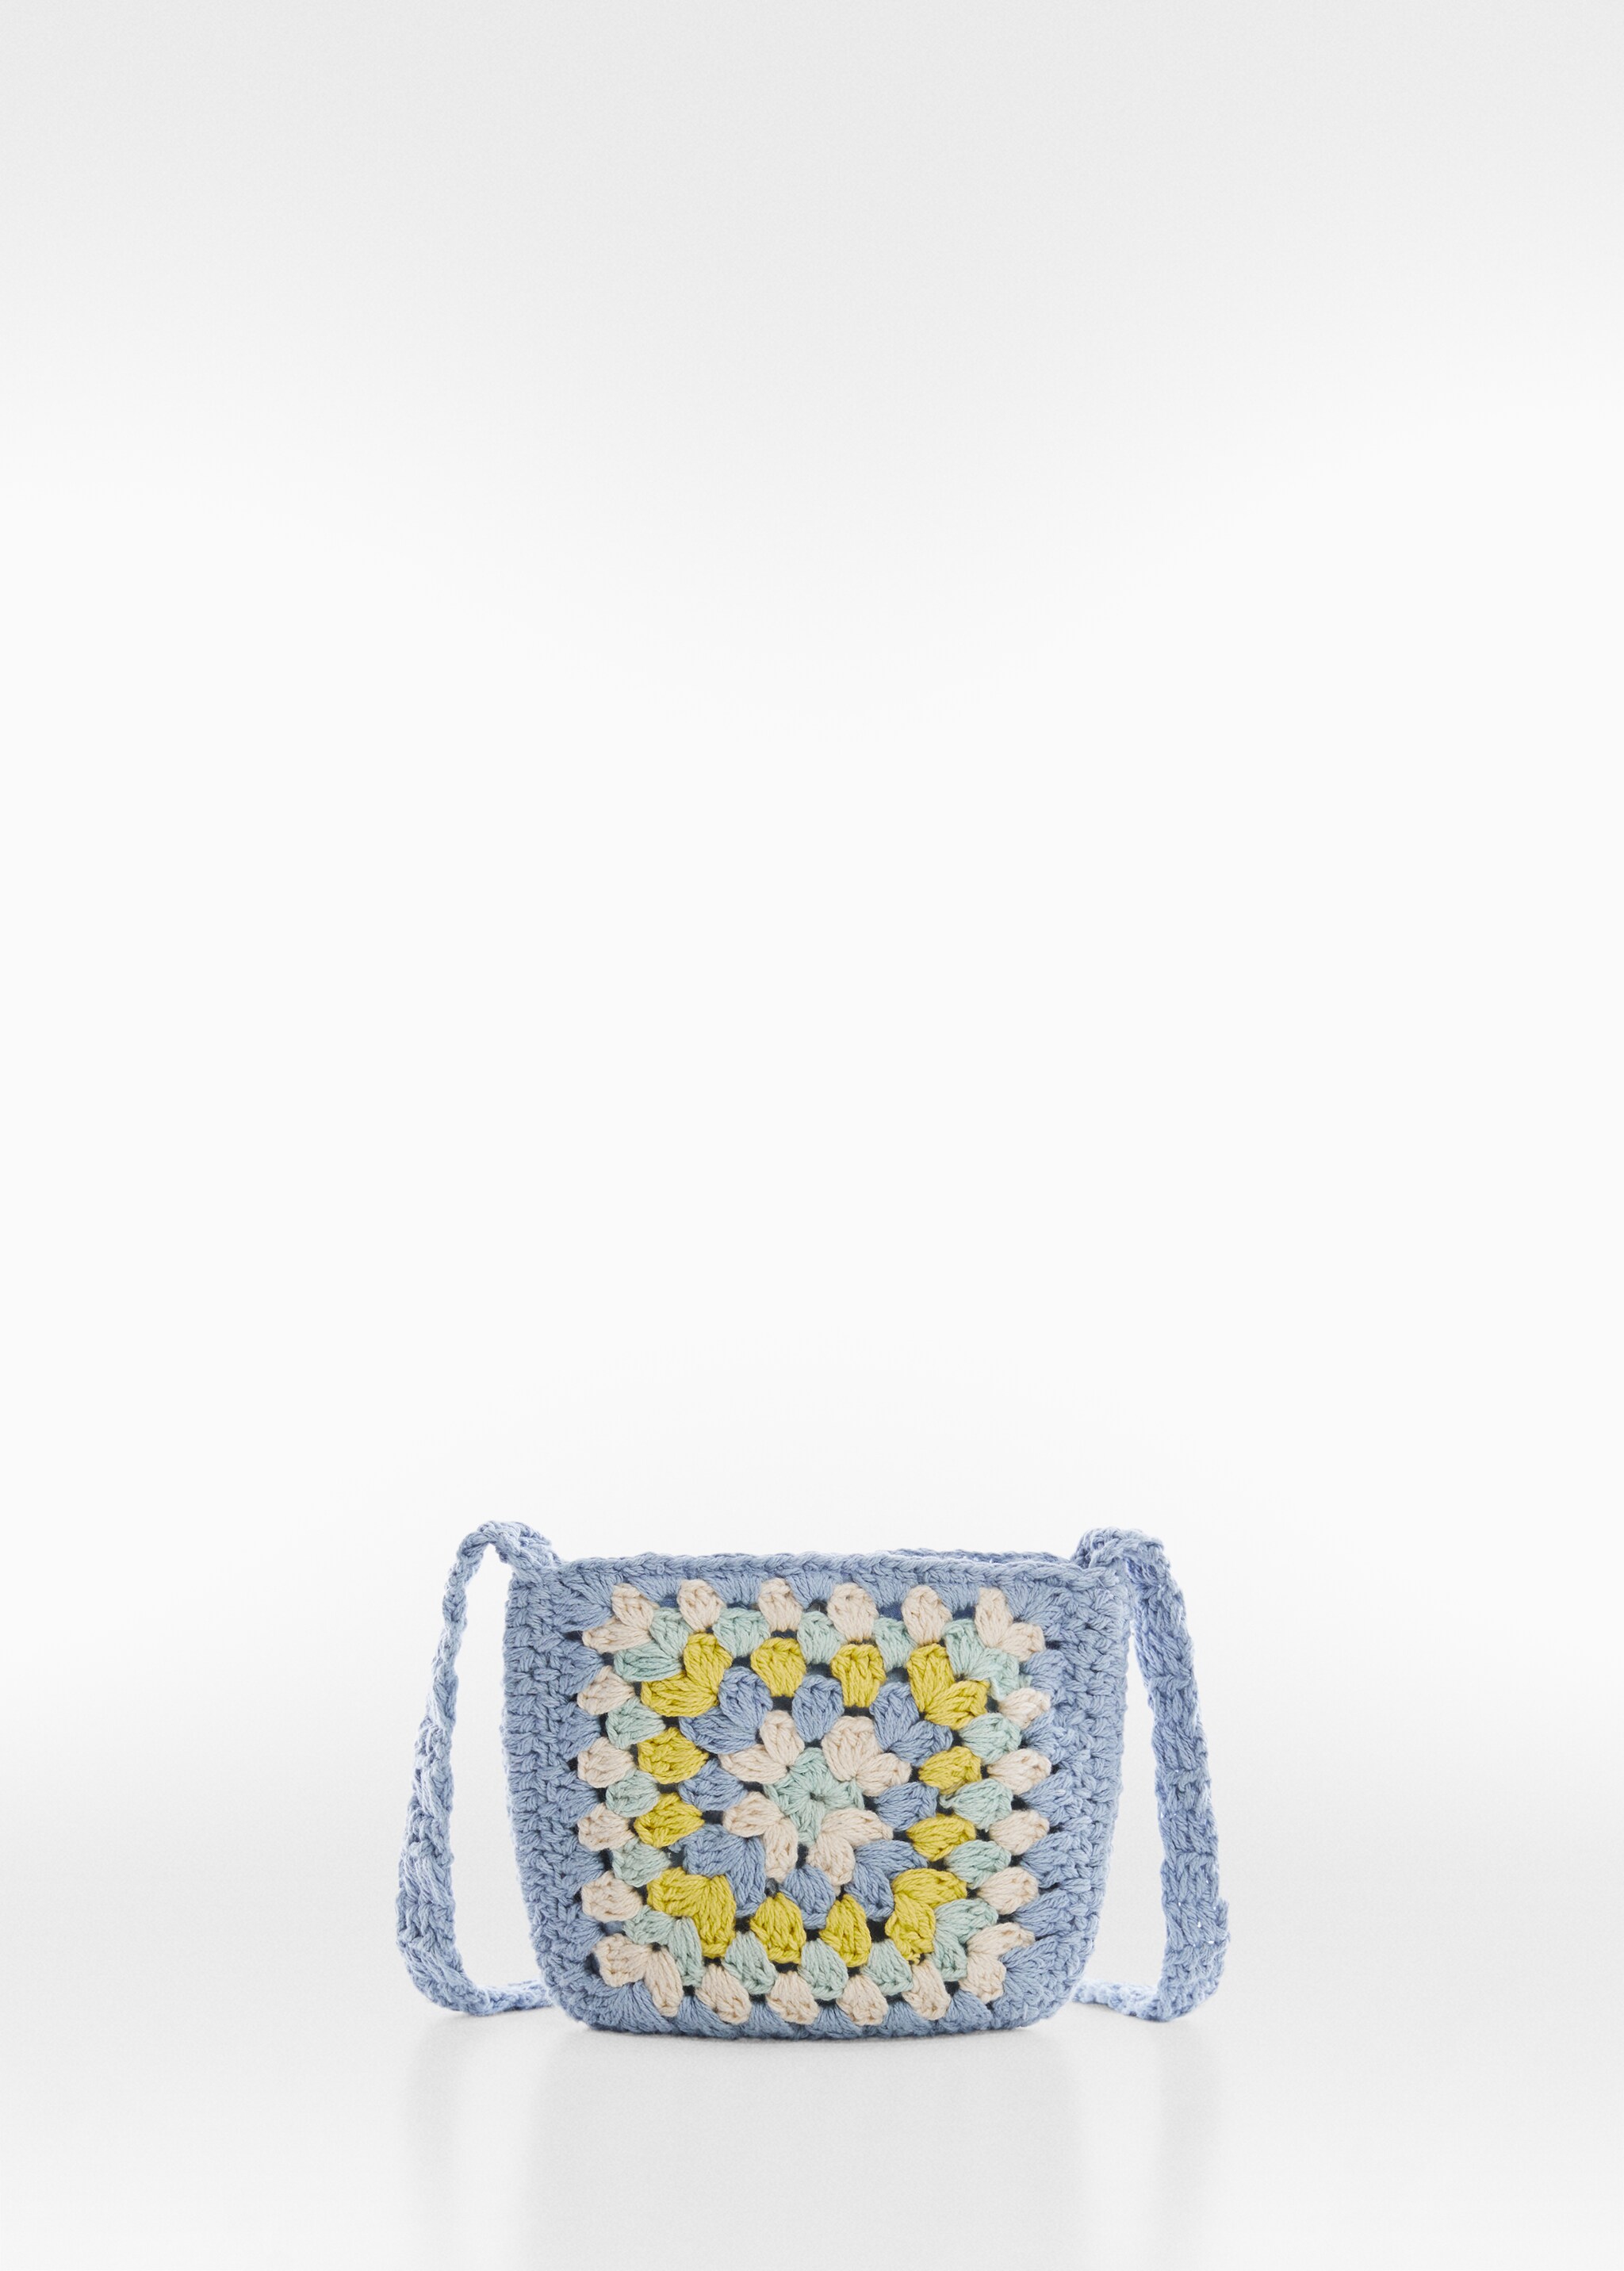 Colourful crochet bag - Article without model